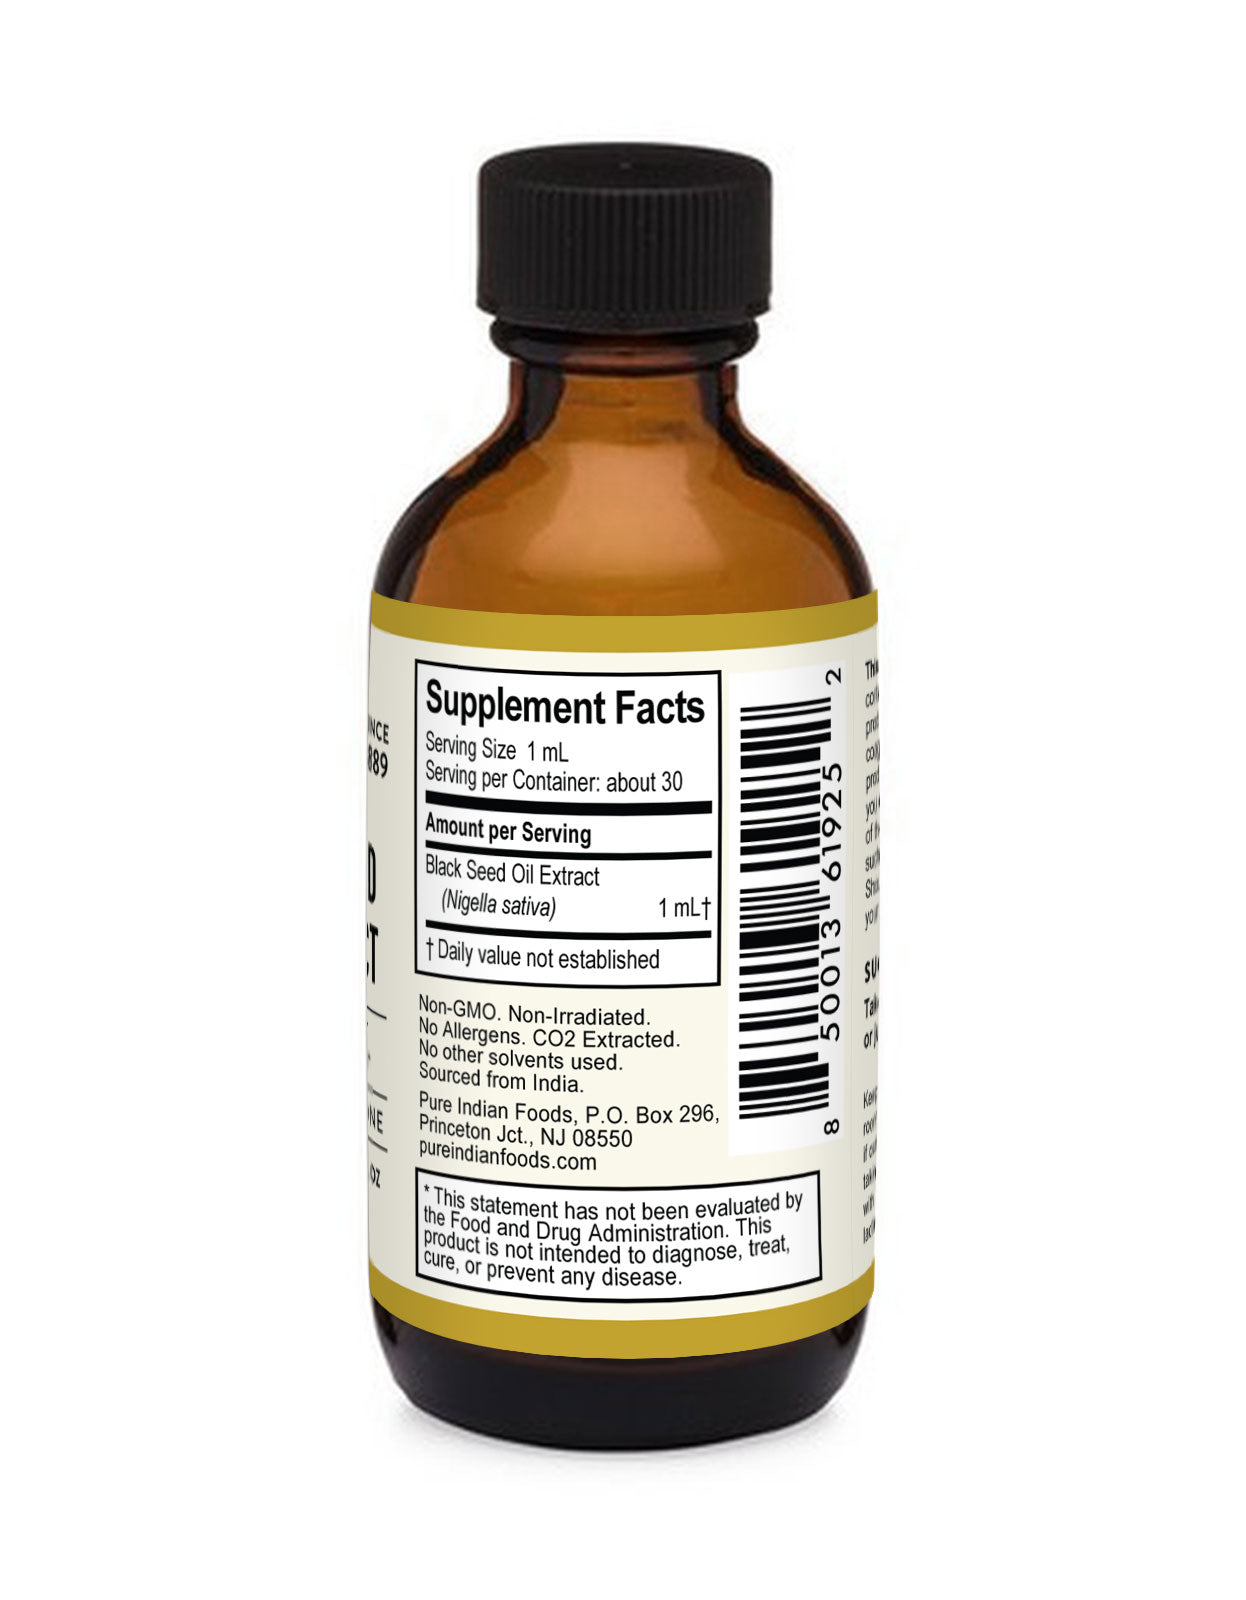 Supplement Facts label on a bottle of Black Seed Oil Extract from Pure Indian Foods